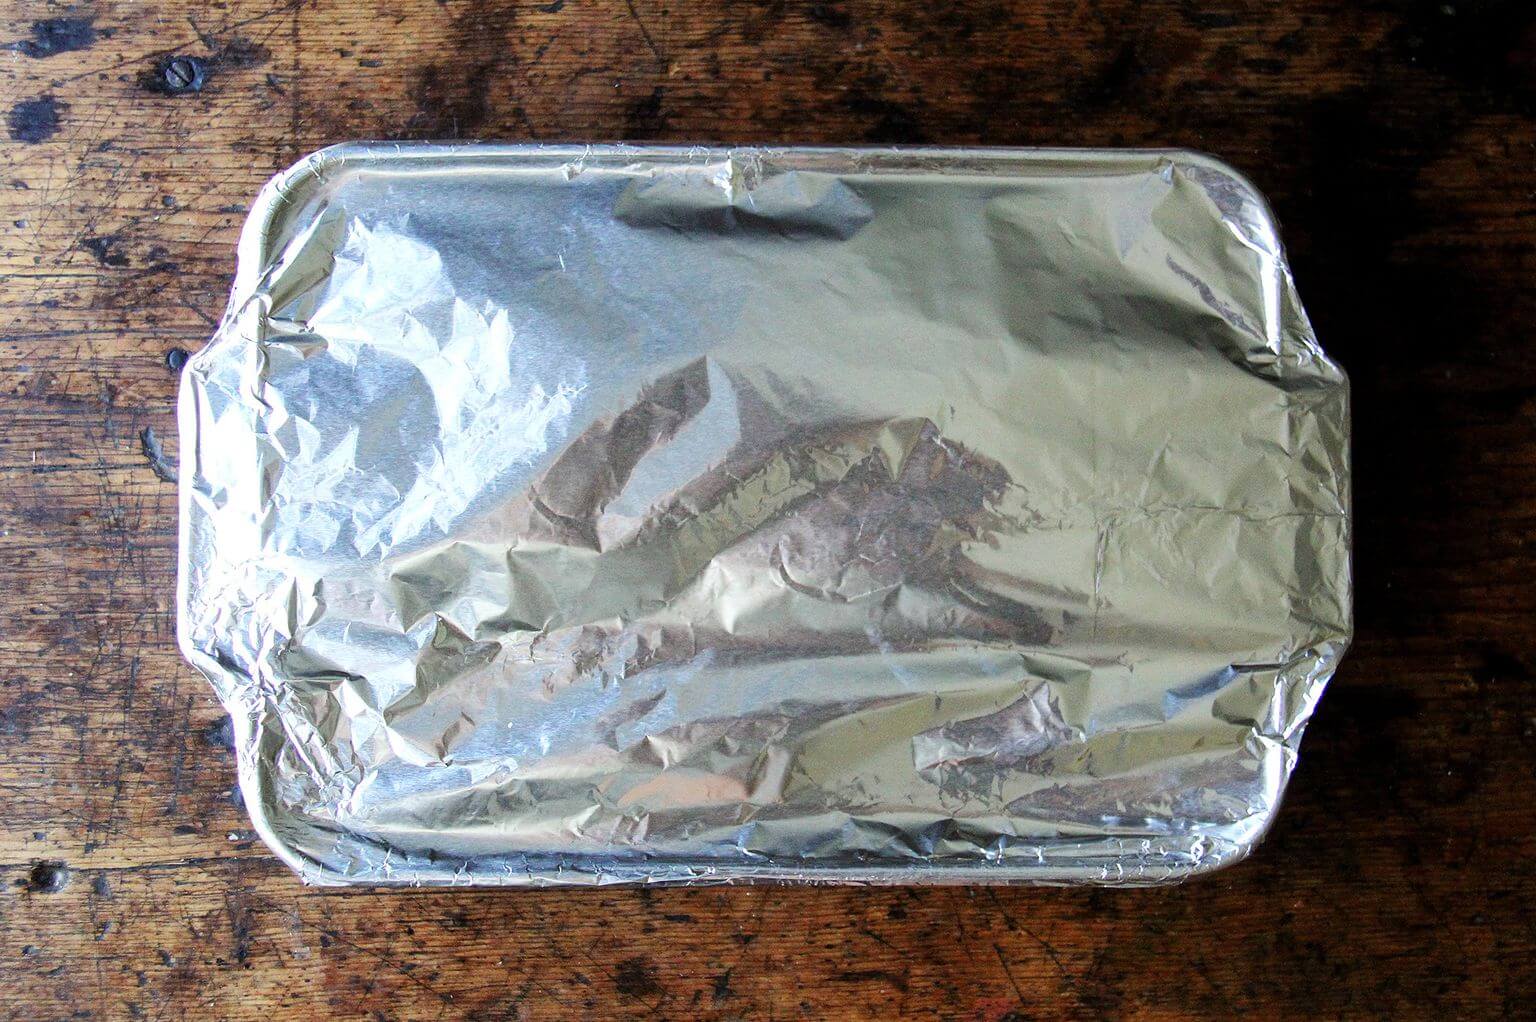 A 9x13-inch pan of unbaked lasagna covered in foil.